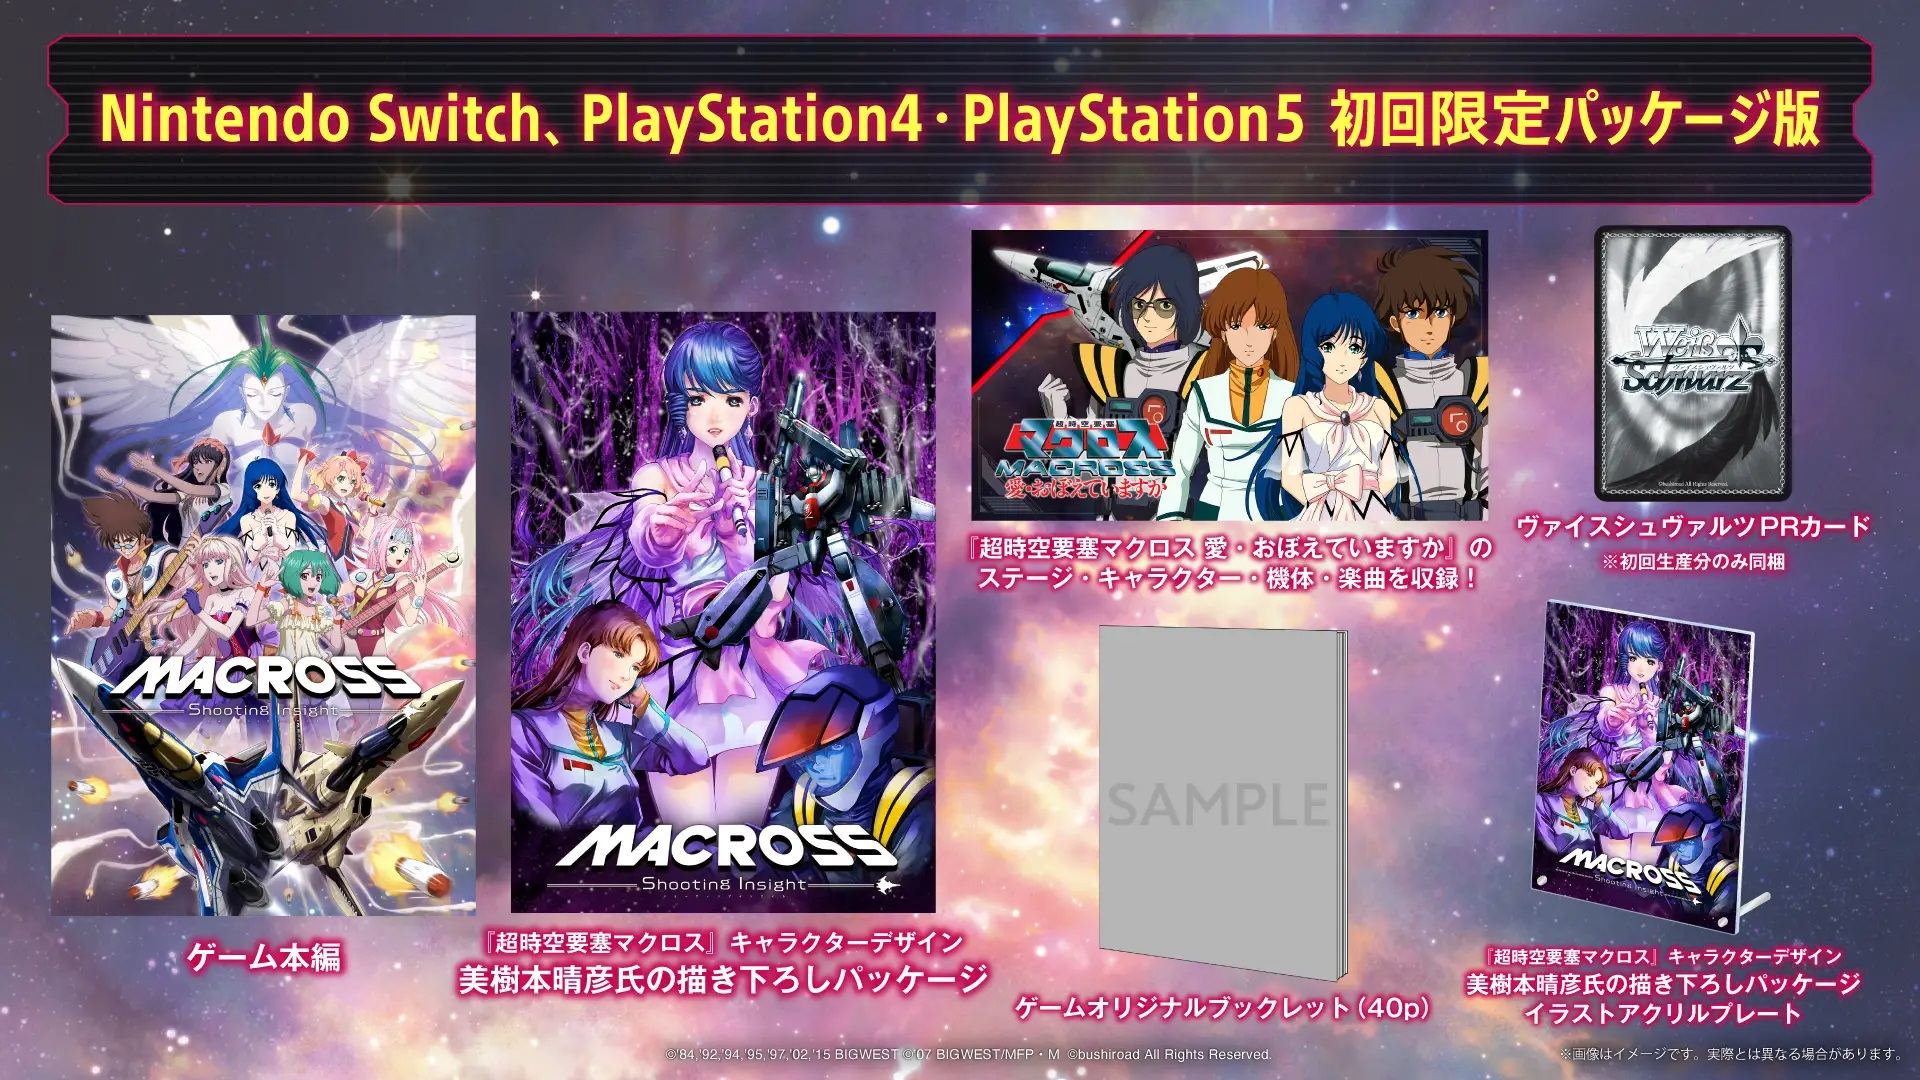 Macross: Shooting Insight [Limited Edition] for Nintendo Switch